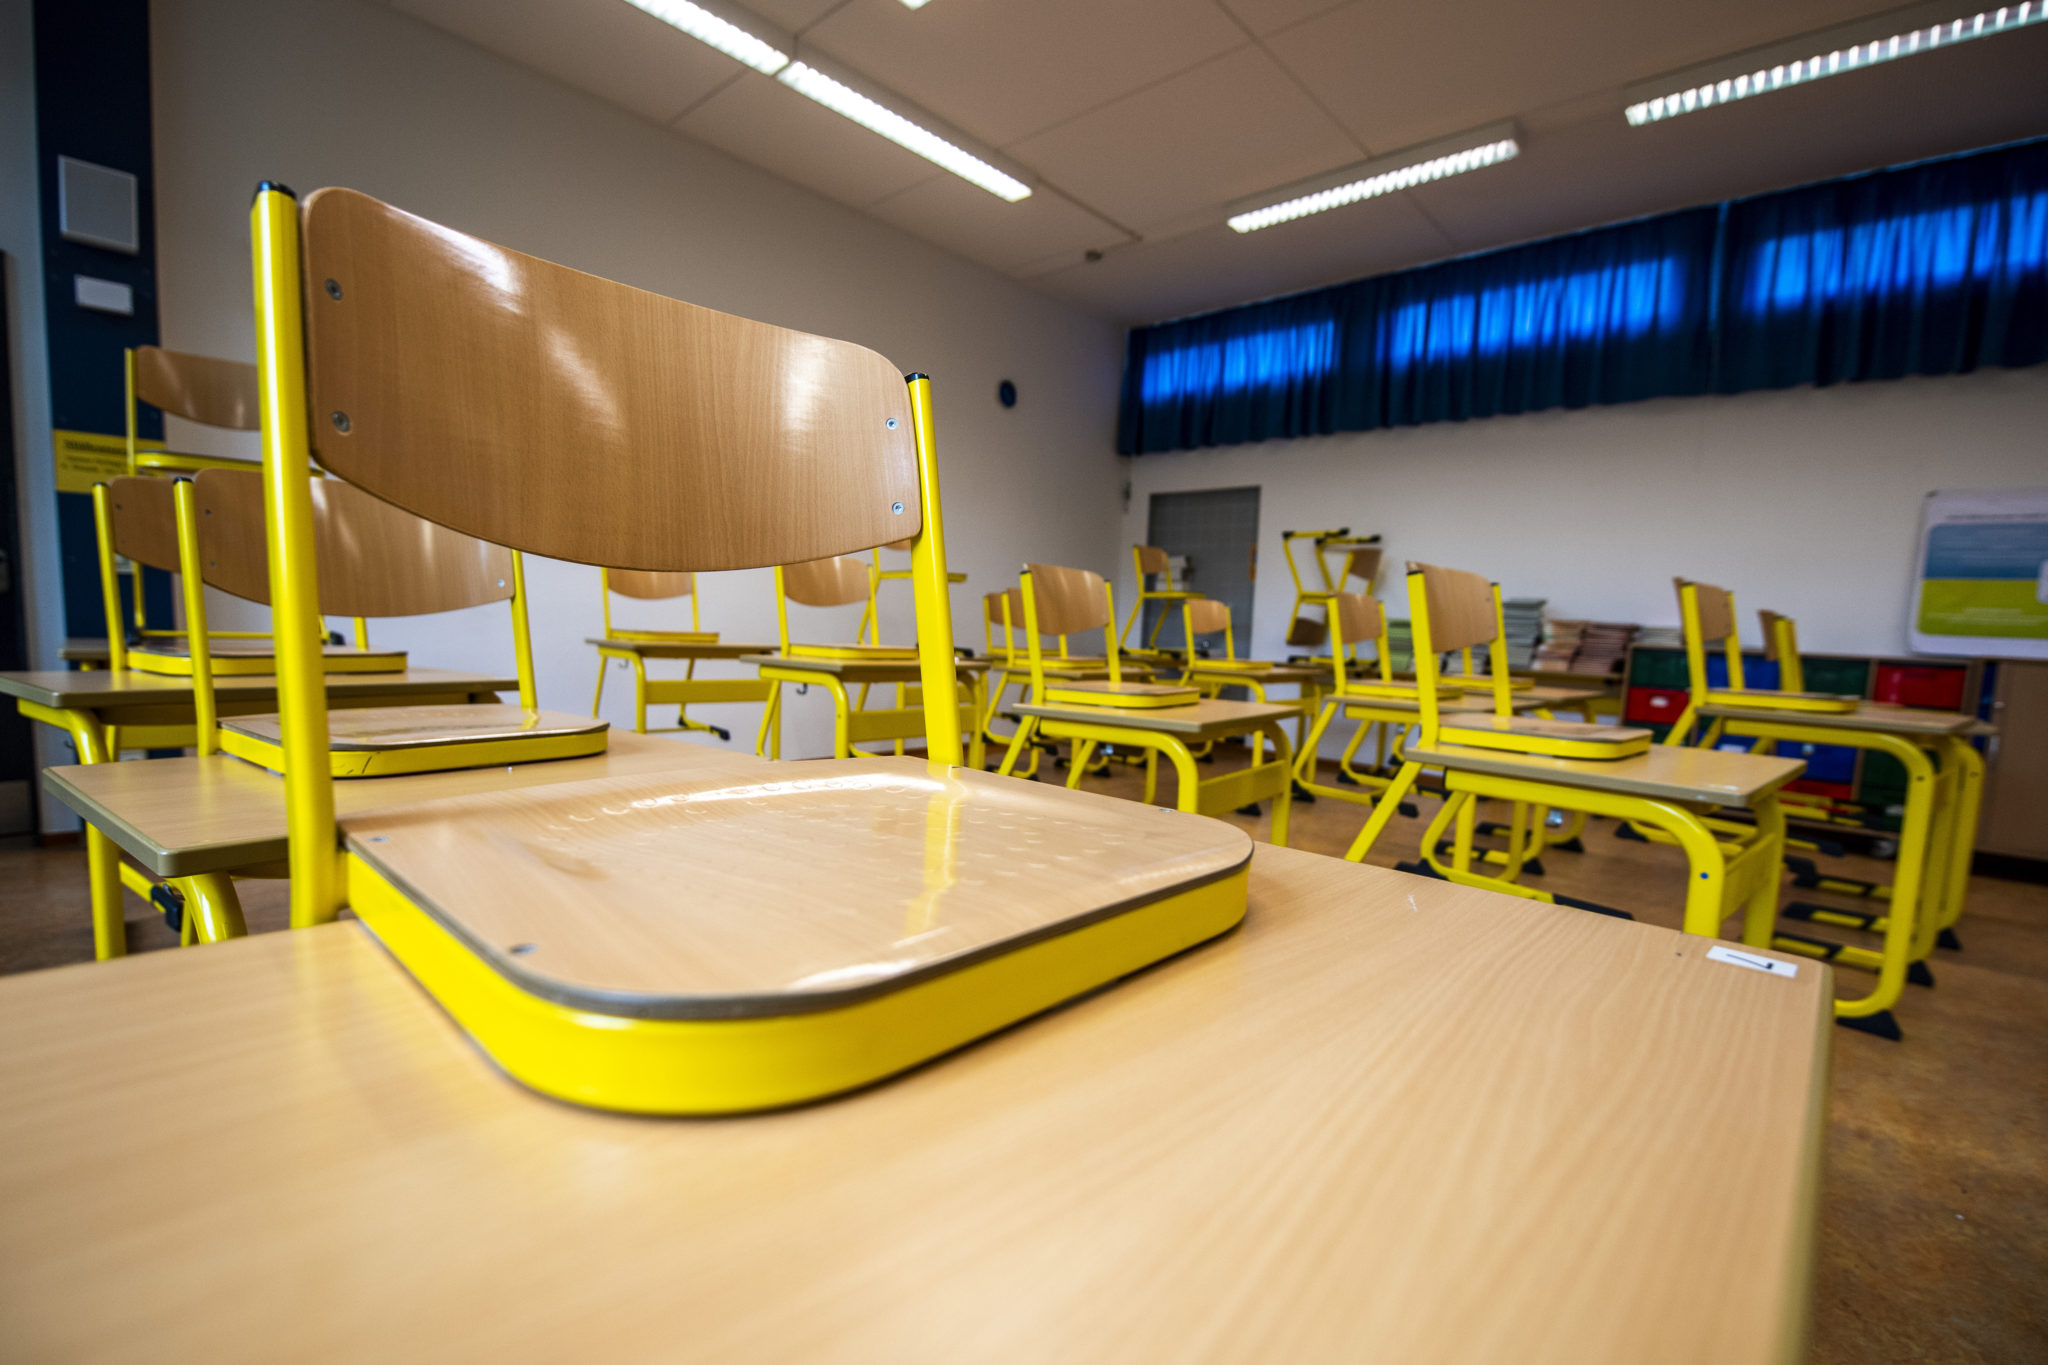 Chairs were placed on the desks in an empty classroom at the Freiherr-vom-Stein School in Gütersloh. 